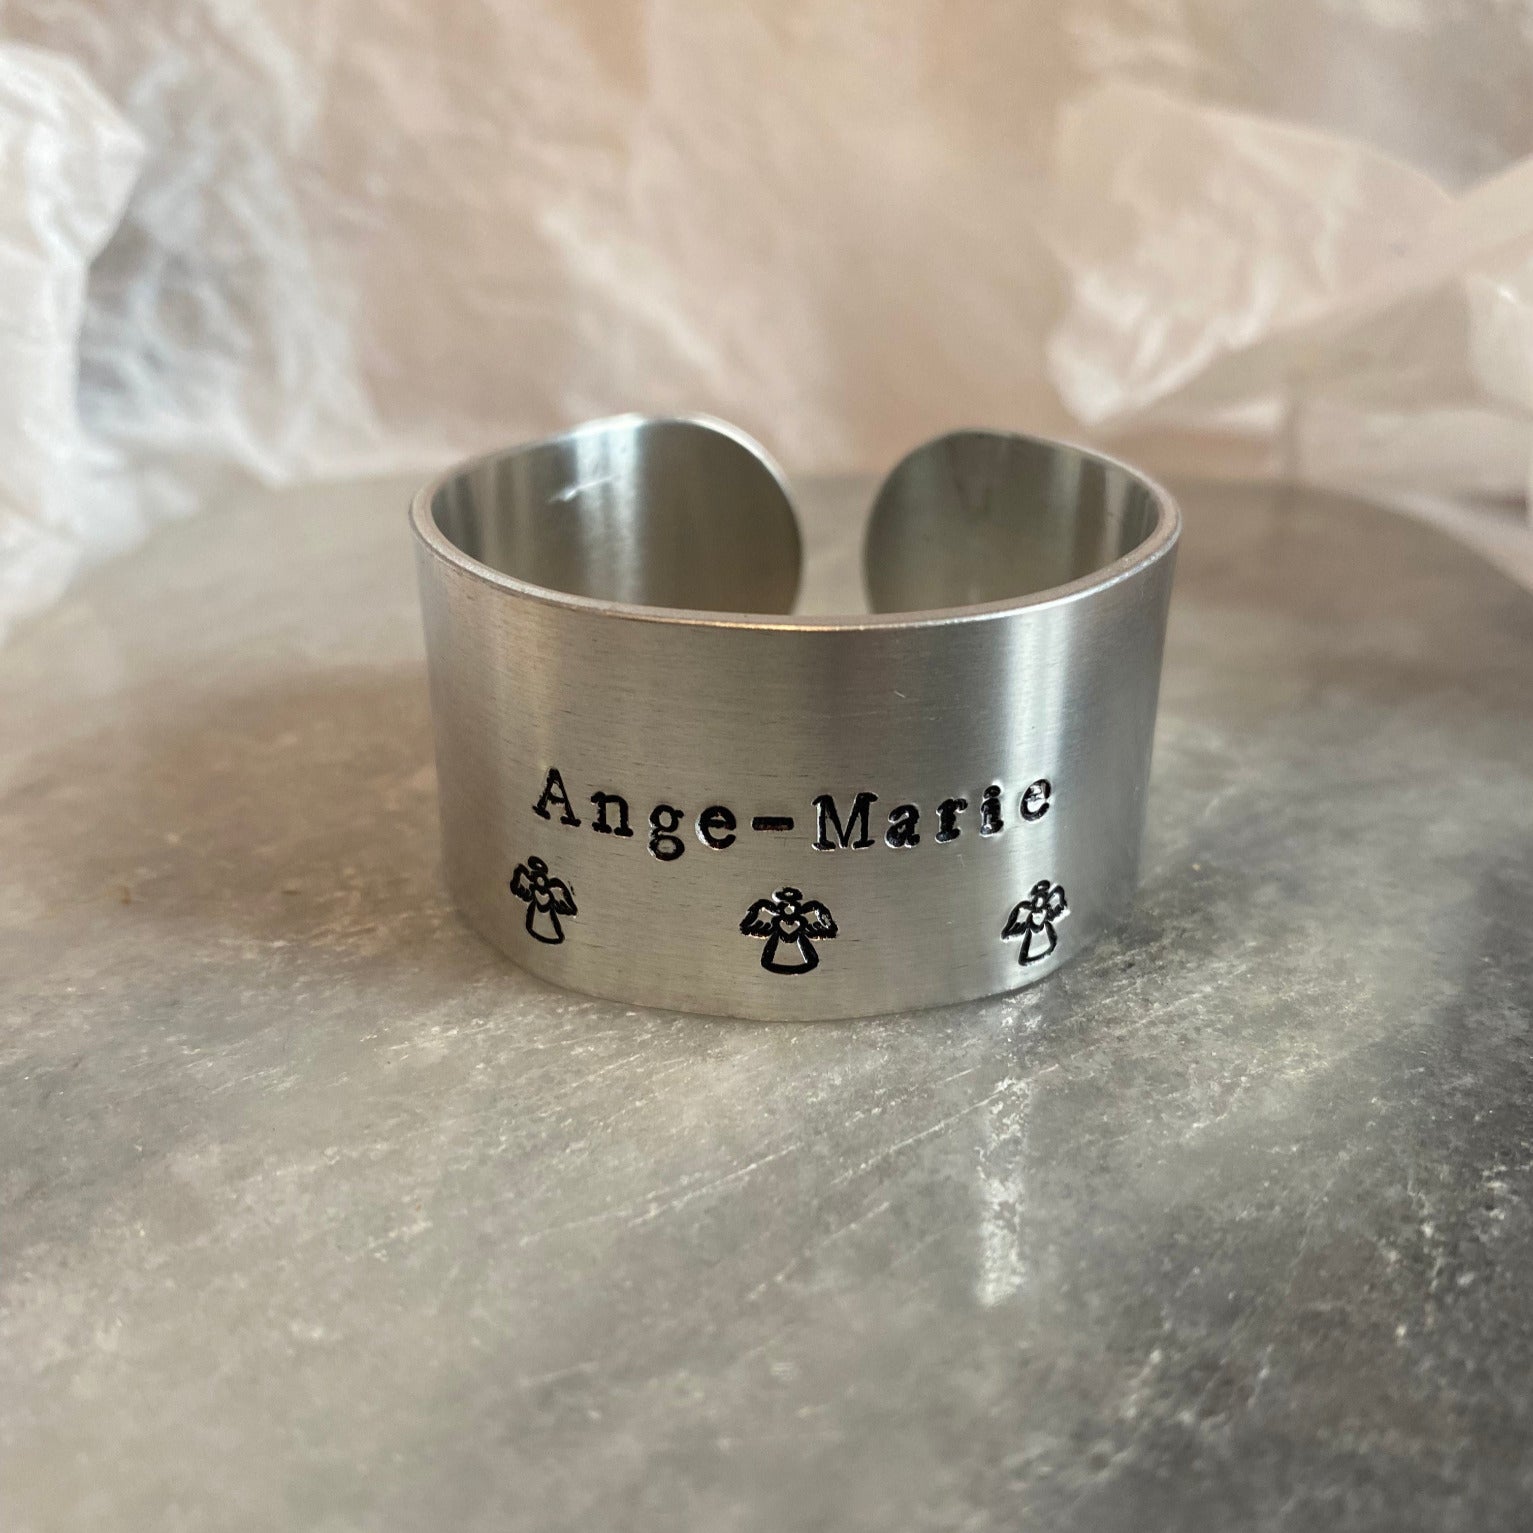 Oops collection - the imperfect - Aluminum M - Ange-Marie with 3 angels